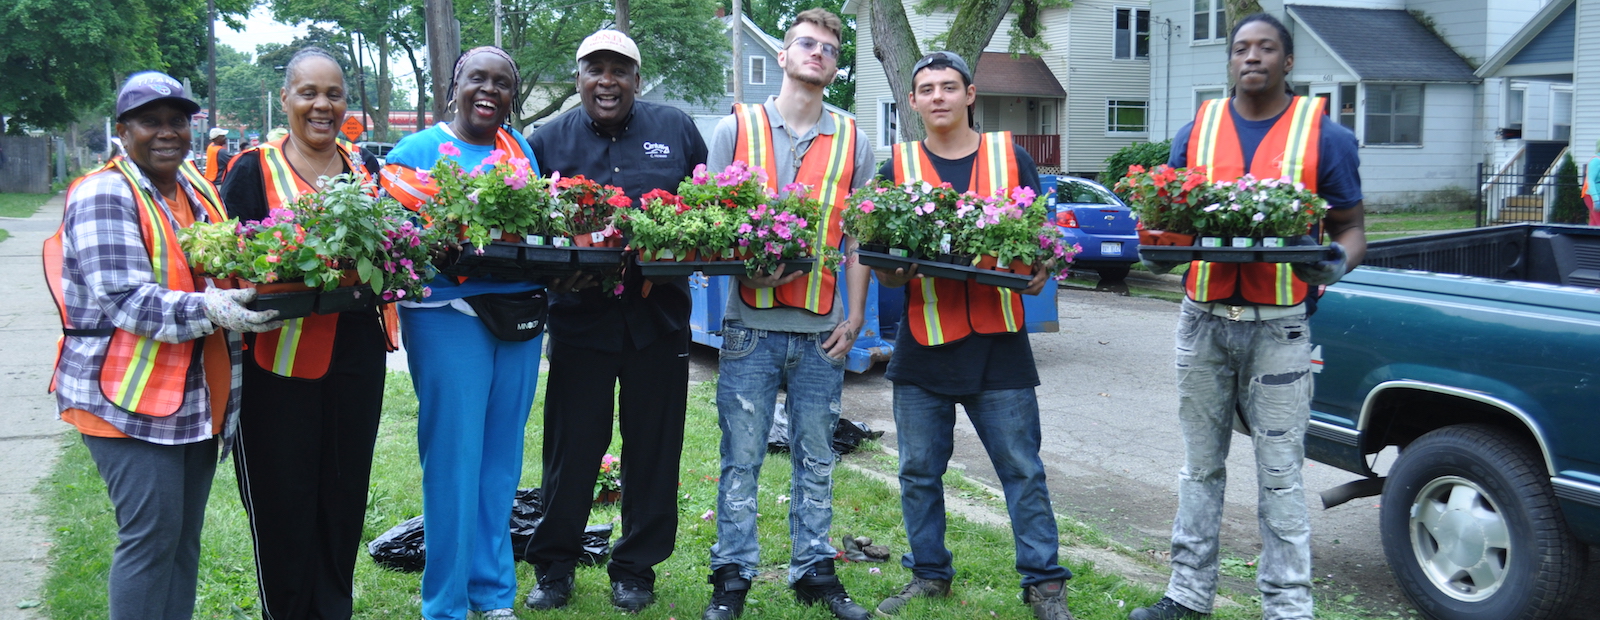 Flowers ready to plant on Ada Street